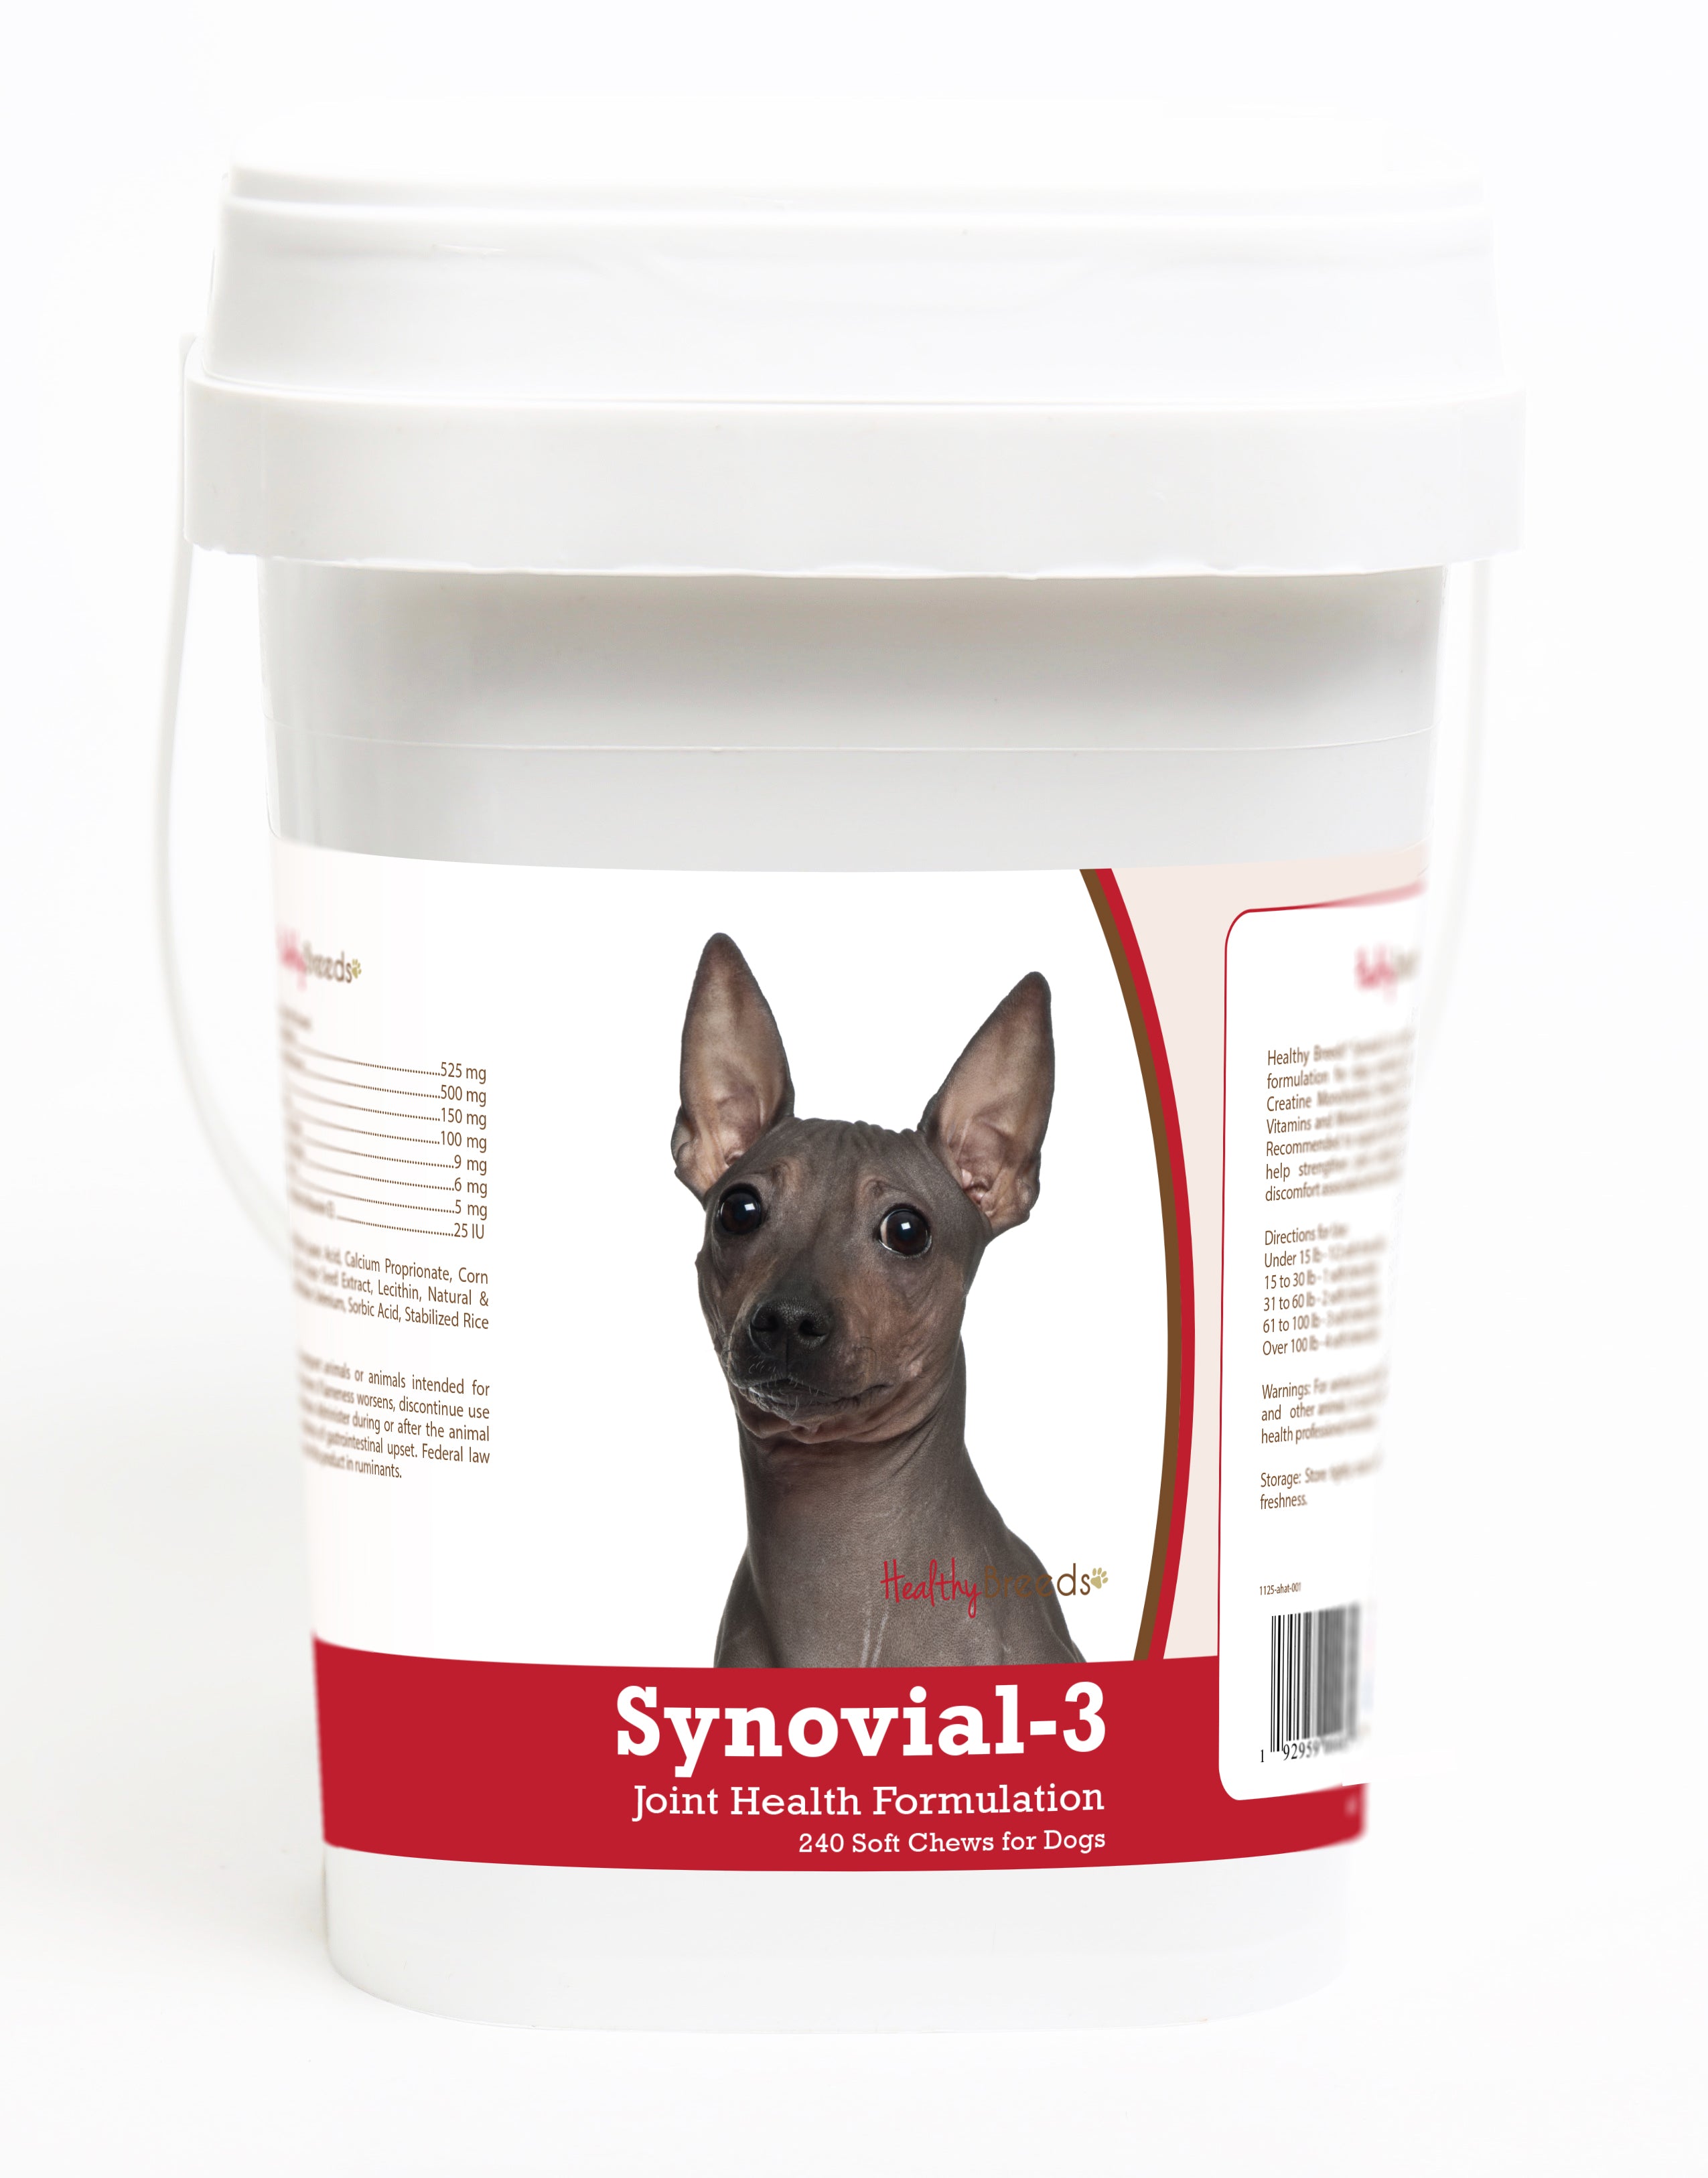 American Hairless Terrier Synovial-3 Joint Health Formulation Soft Chews 240 Count